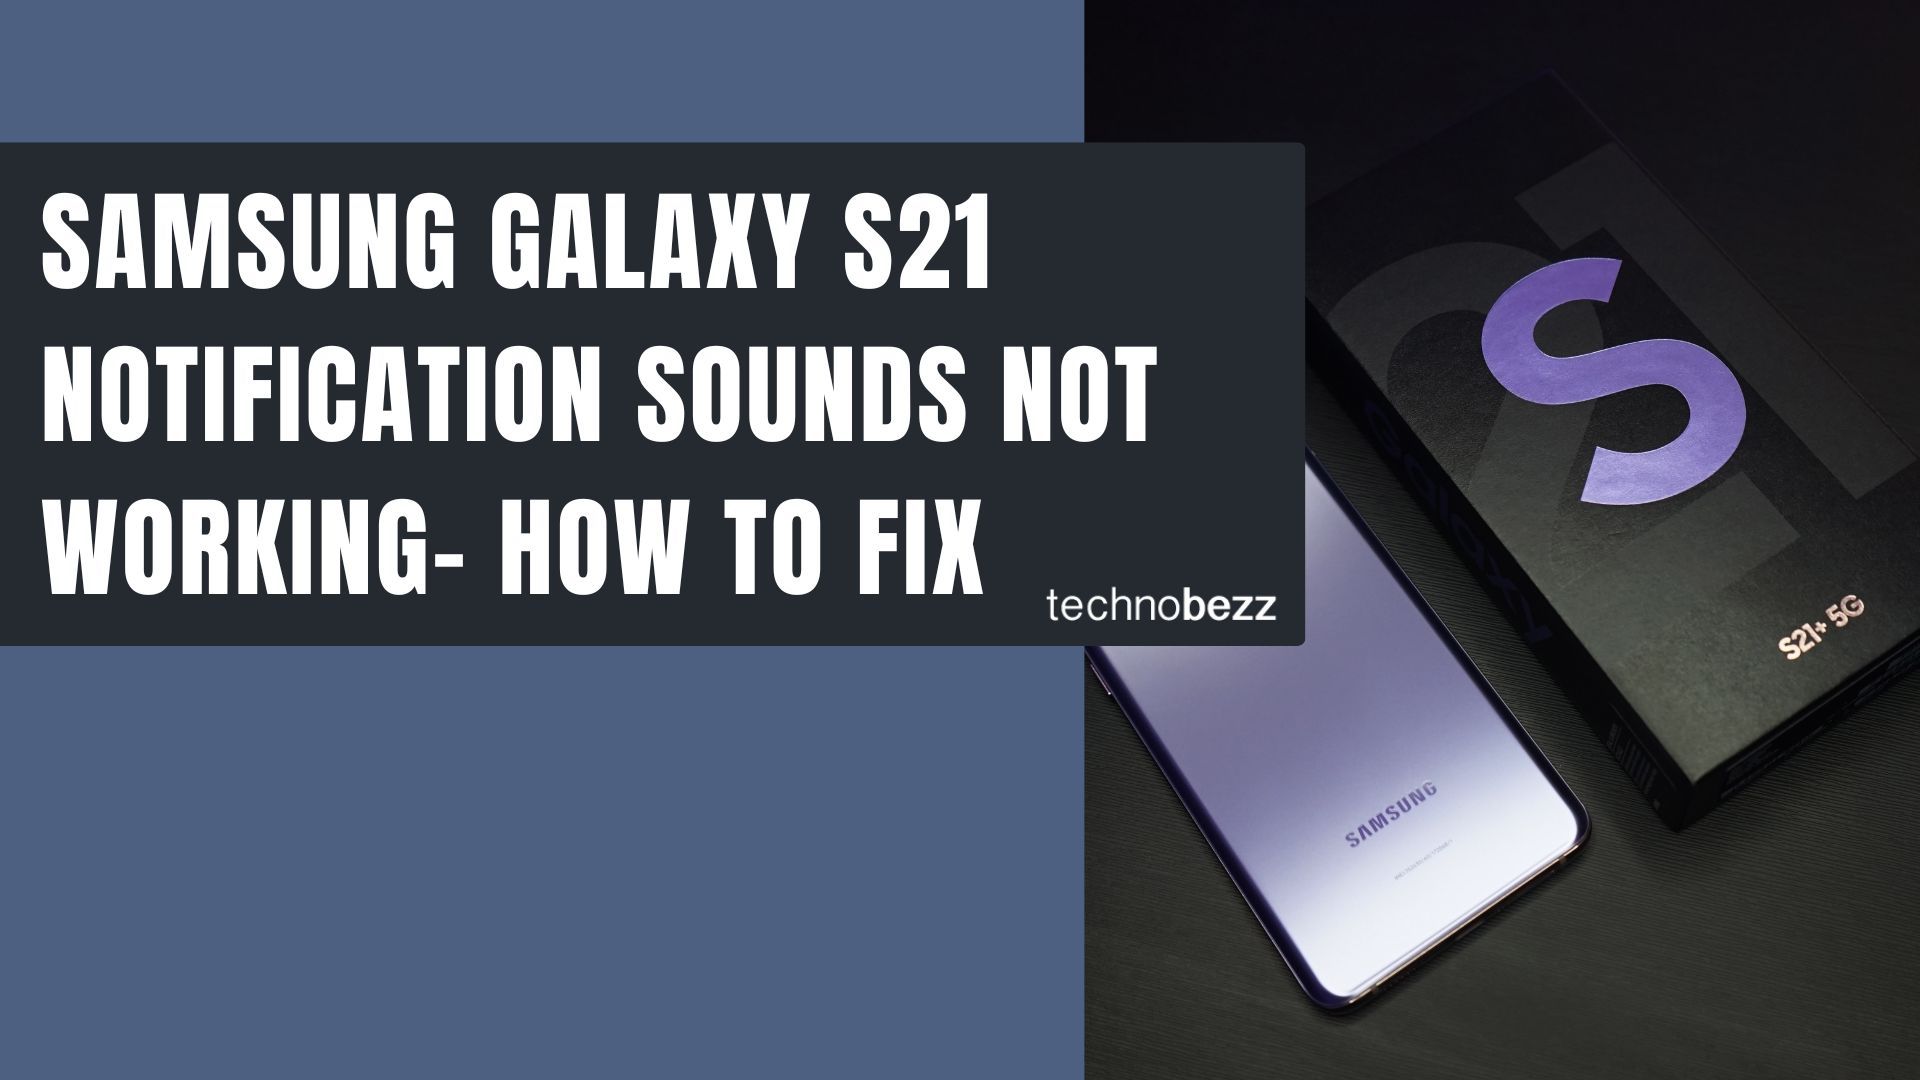 Samsung Galaxy S21 Notification Sounds Not Working How To Fix